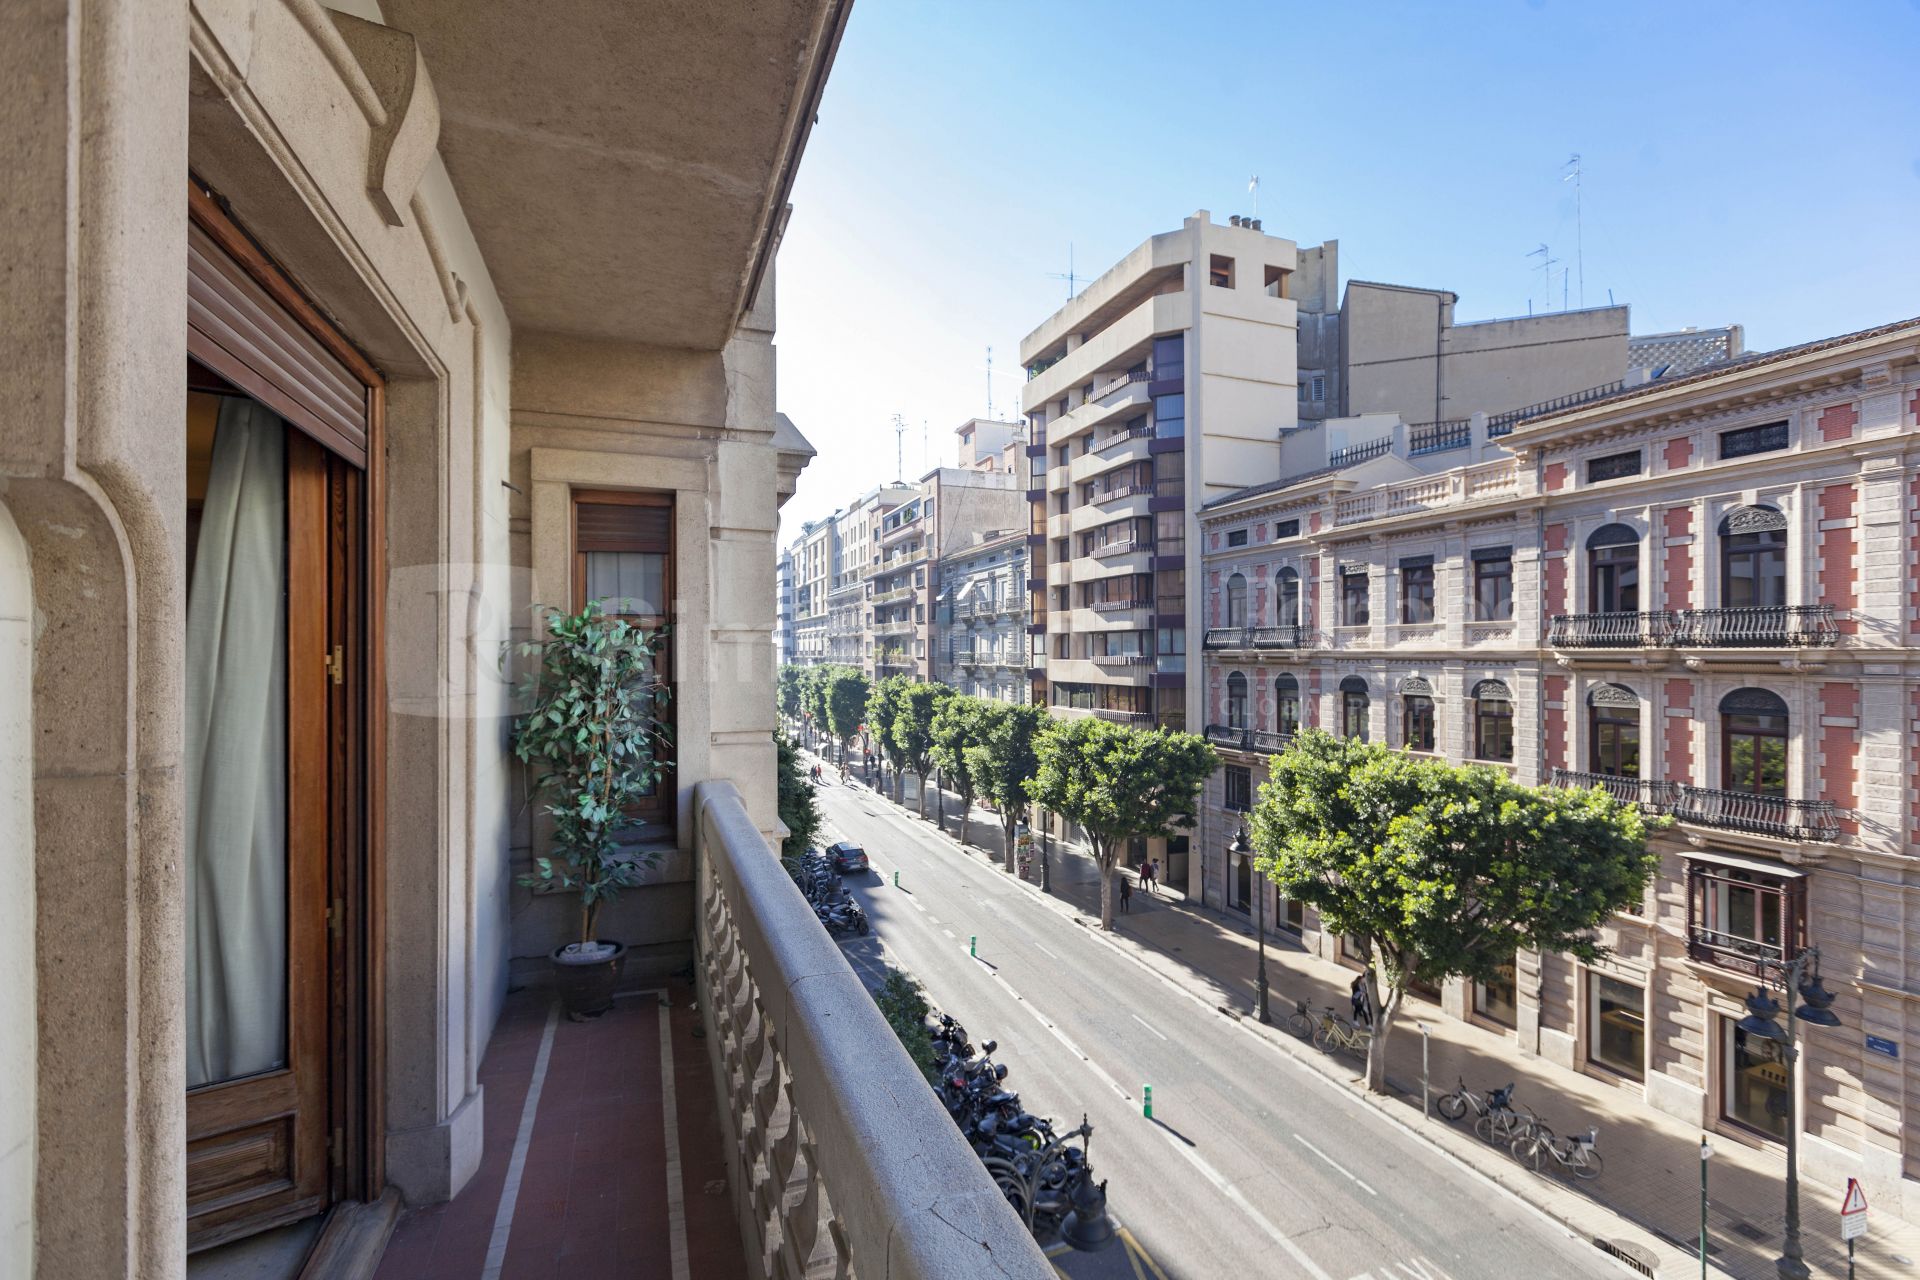 Exclusive house of more than 350 m2 in the middle of Calle de Colón de Valencia, with several balconies, one floor per floor and fully exterior.